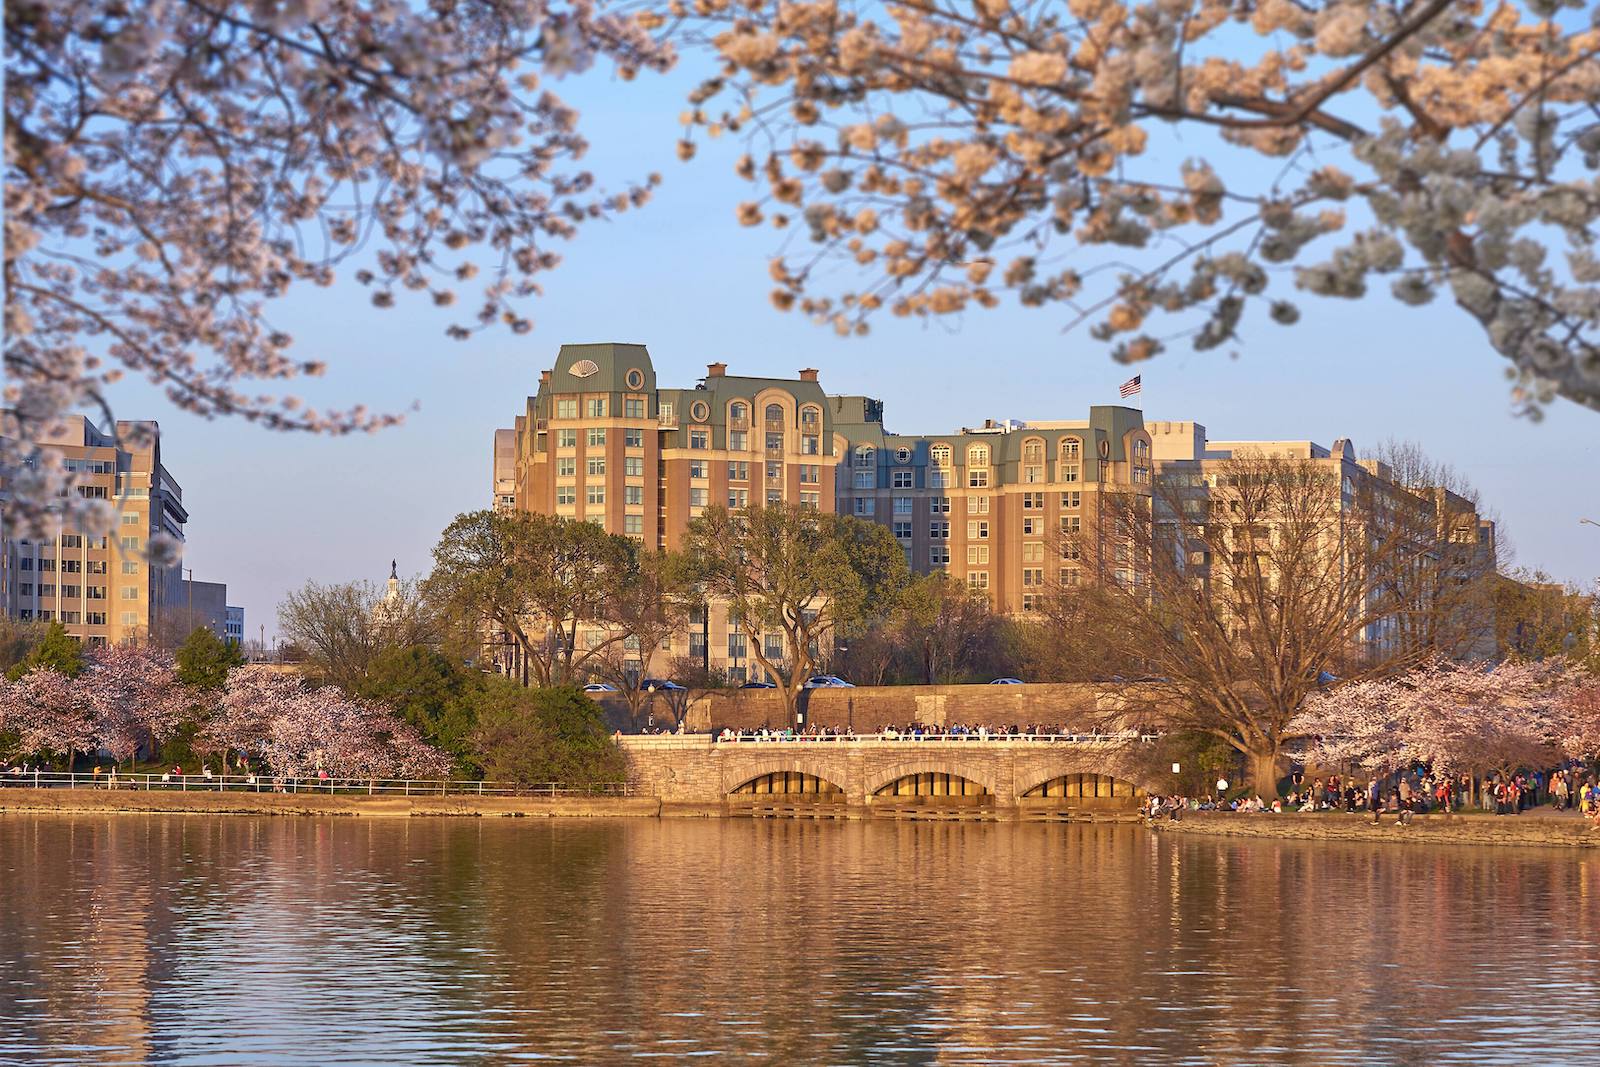 Mandarin oriental hotel with cherry trees in blossom